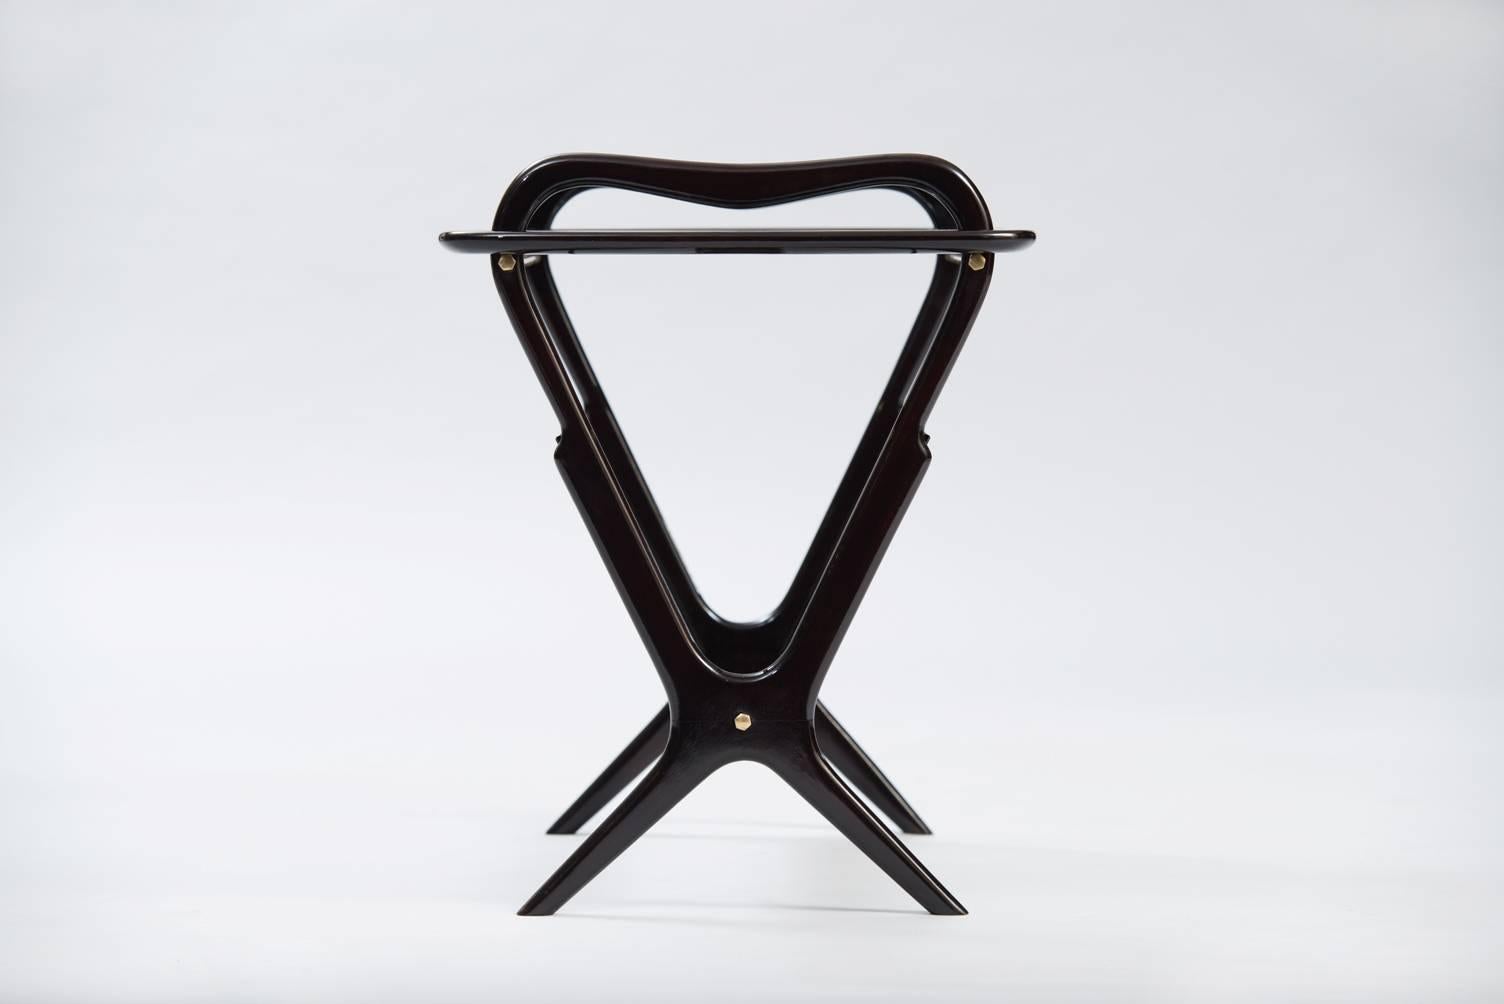 Ebonized wood and glass side table with magazines rack, the top is a removable tray.
Producer: de Baggis